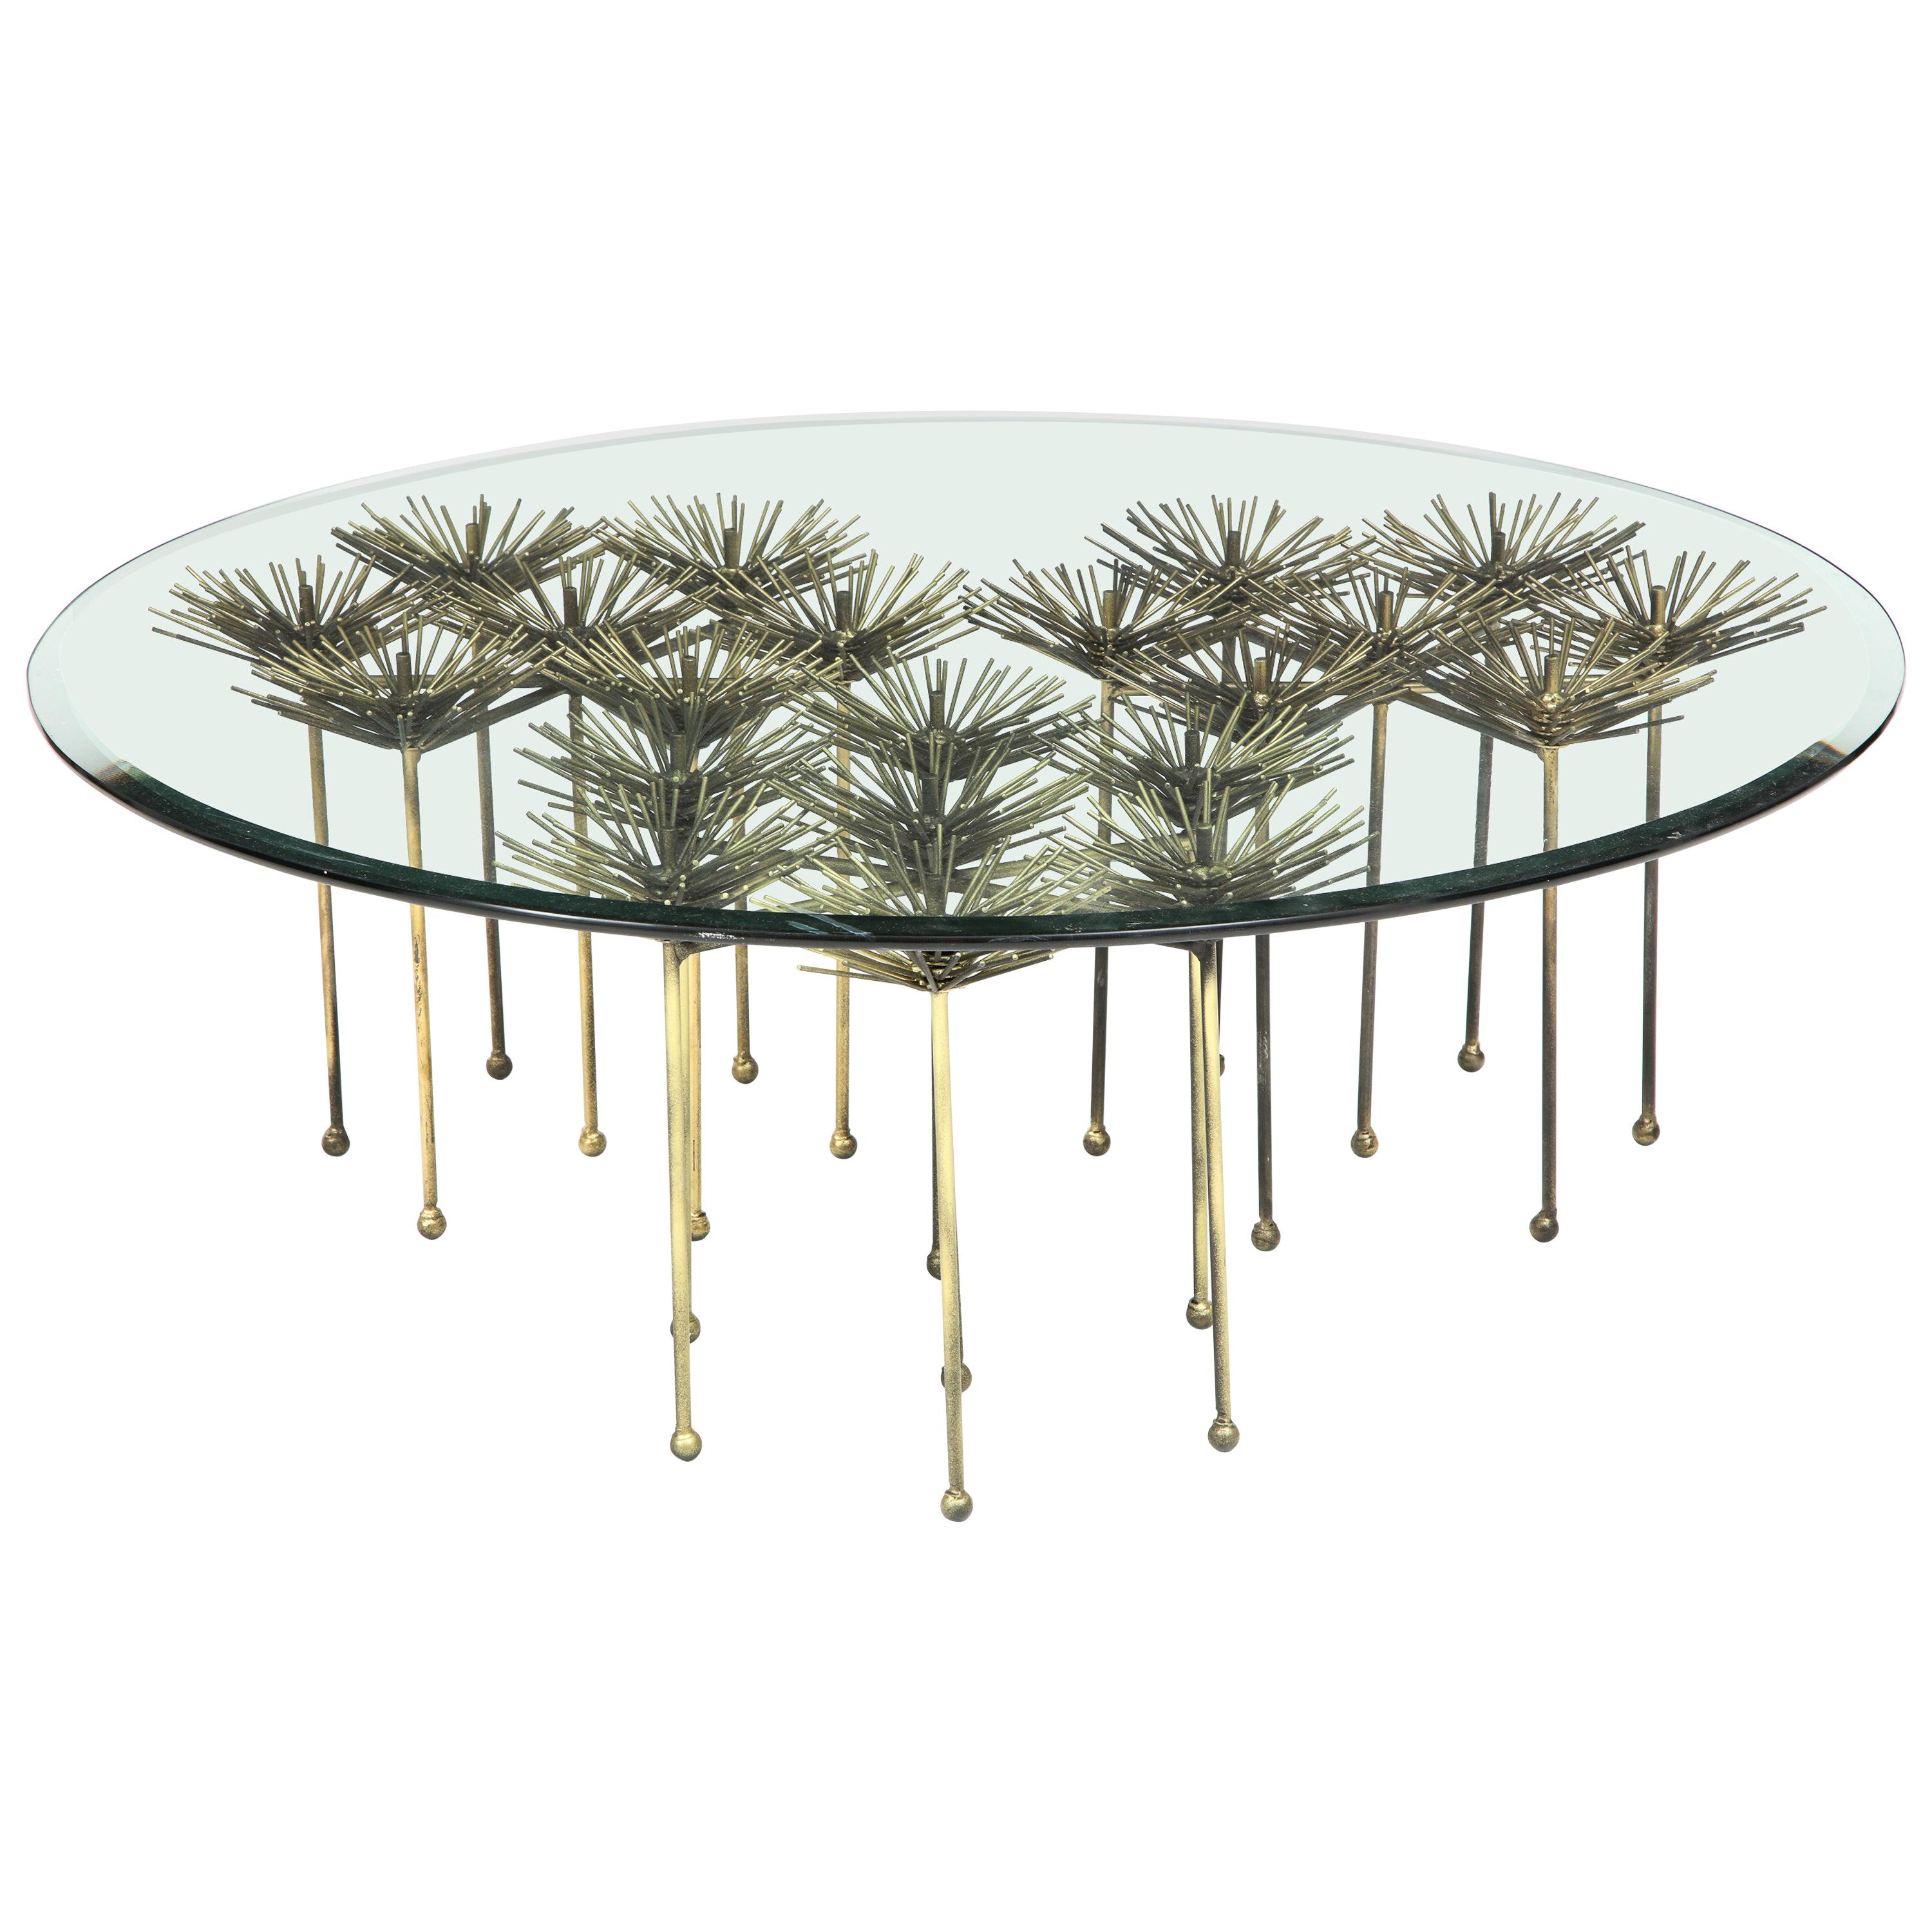 Brutalist Gilt Floral Table with Glass Top in the Manner of Seandel or Jere